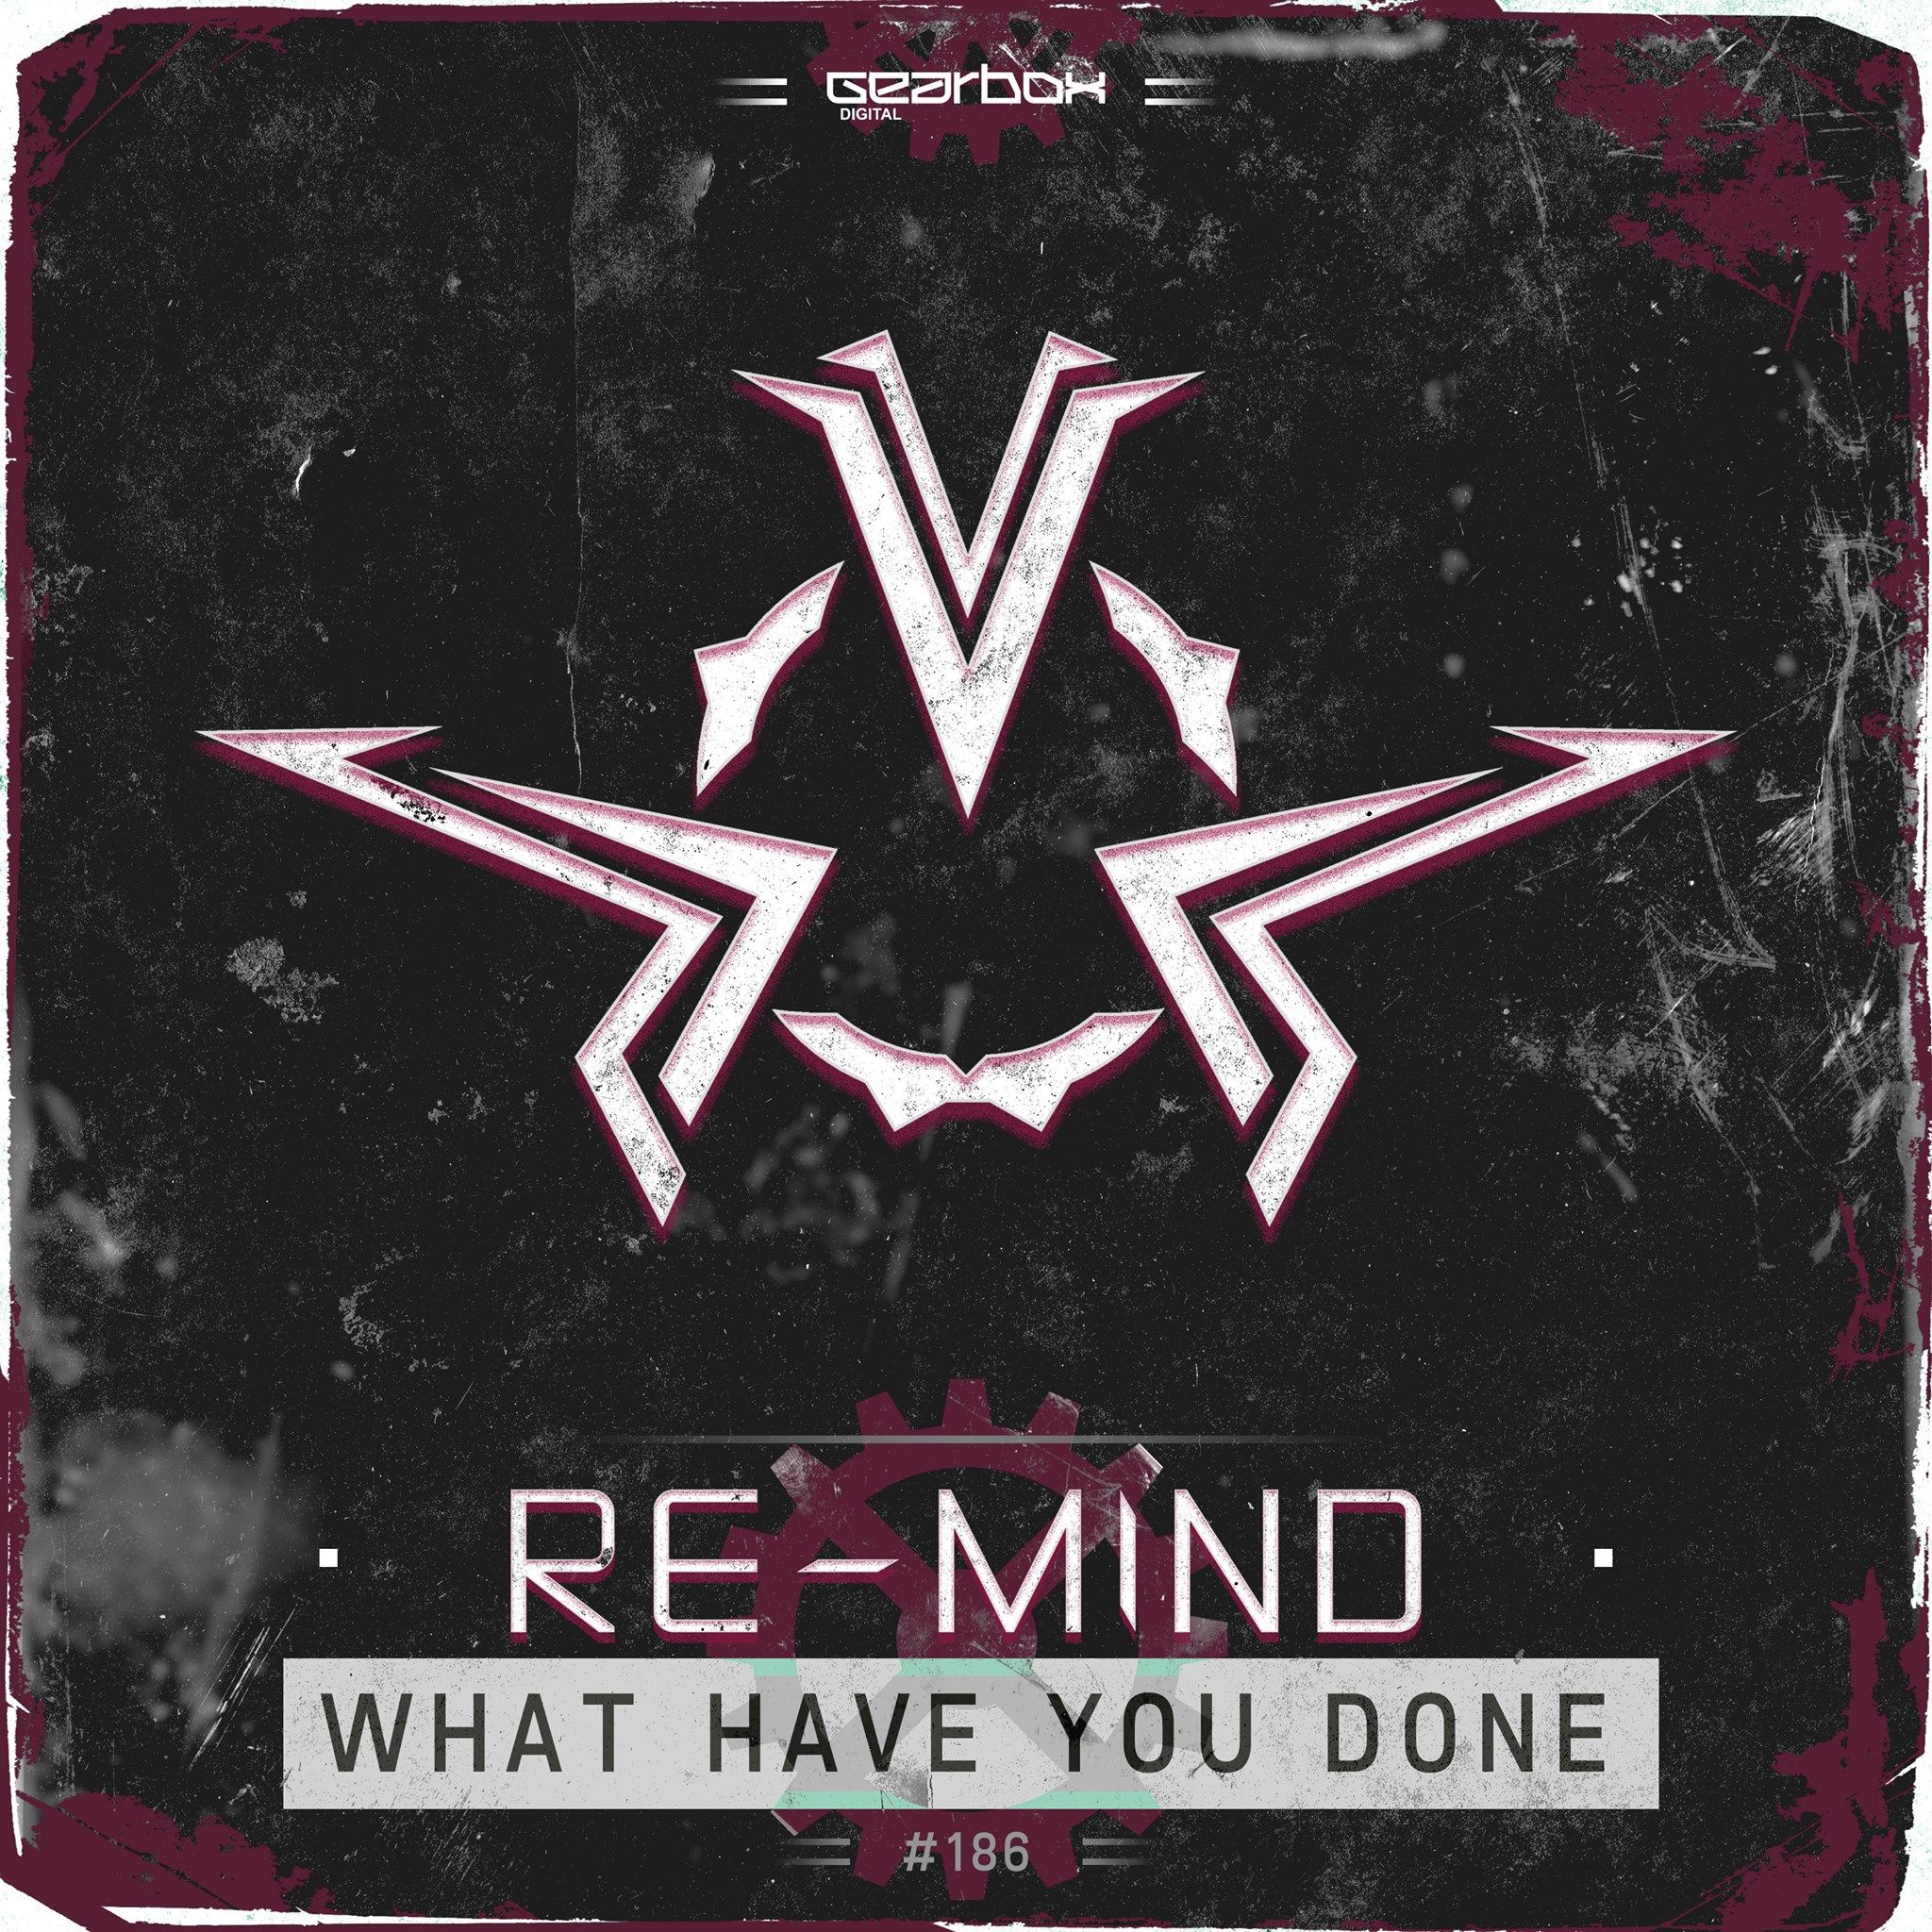 Re-Mind - What Have You Done (Original Mix)